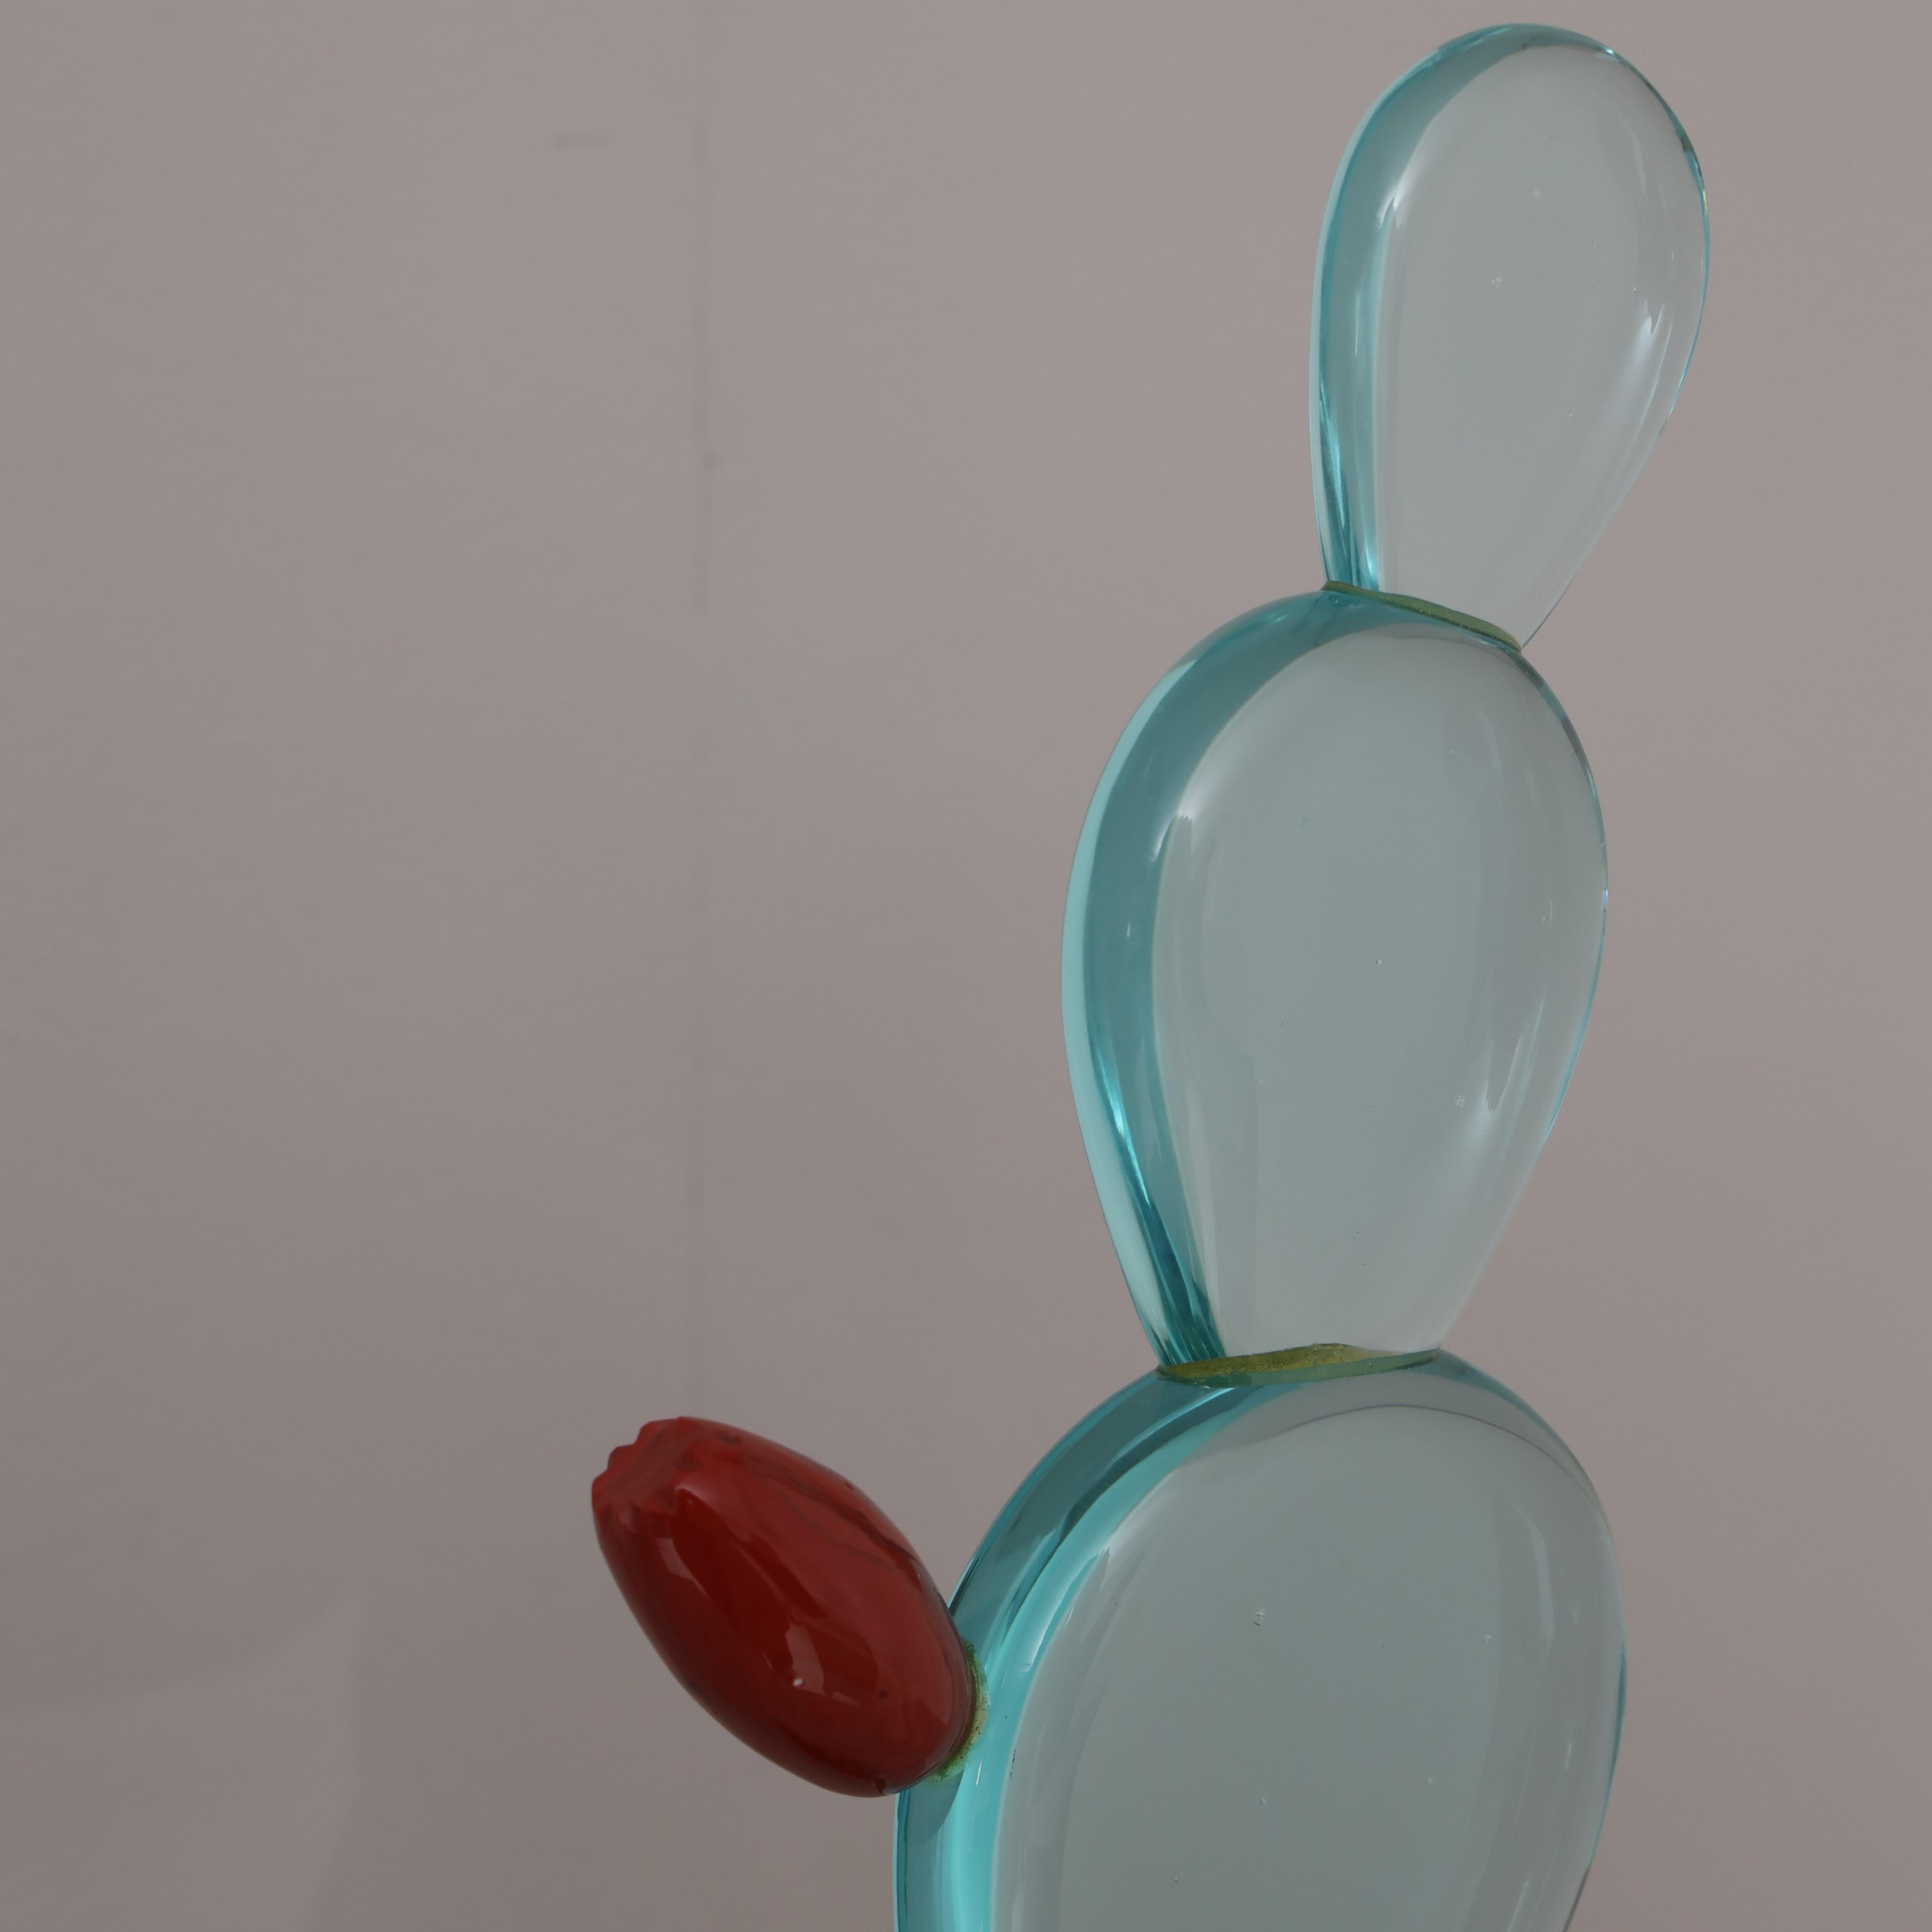 Abstract Italian Art Glass Sculpture For Sale 3